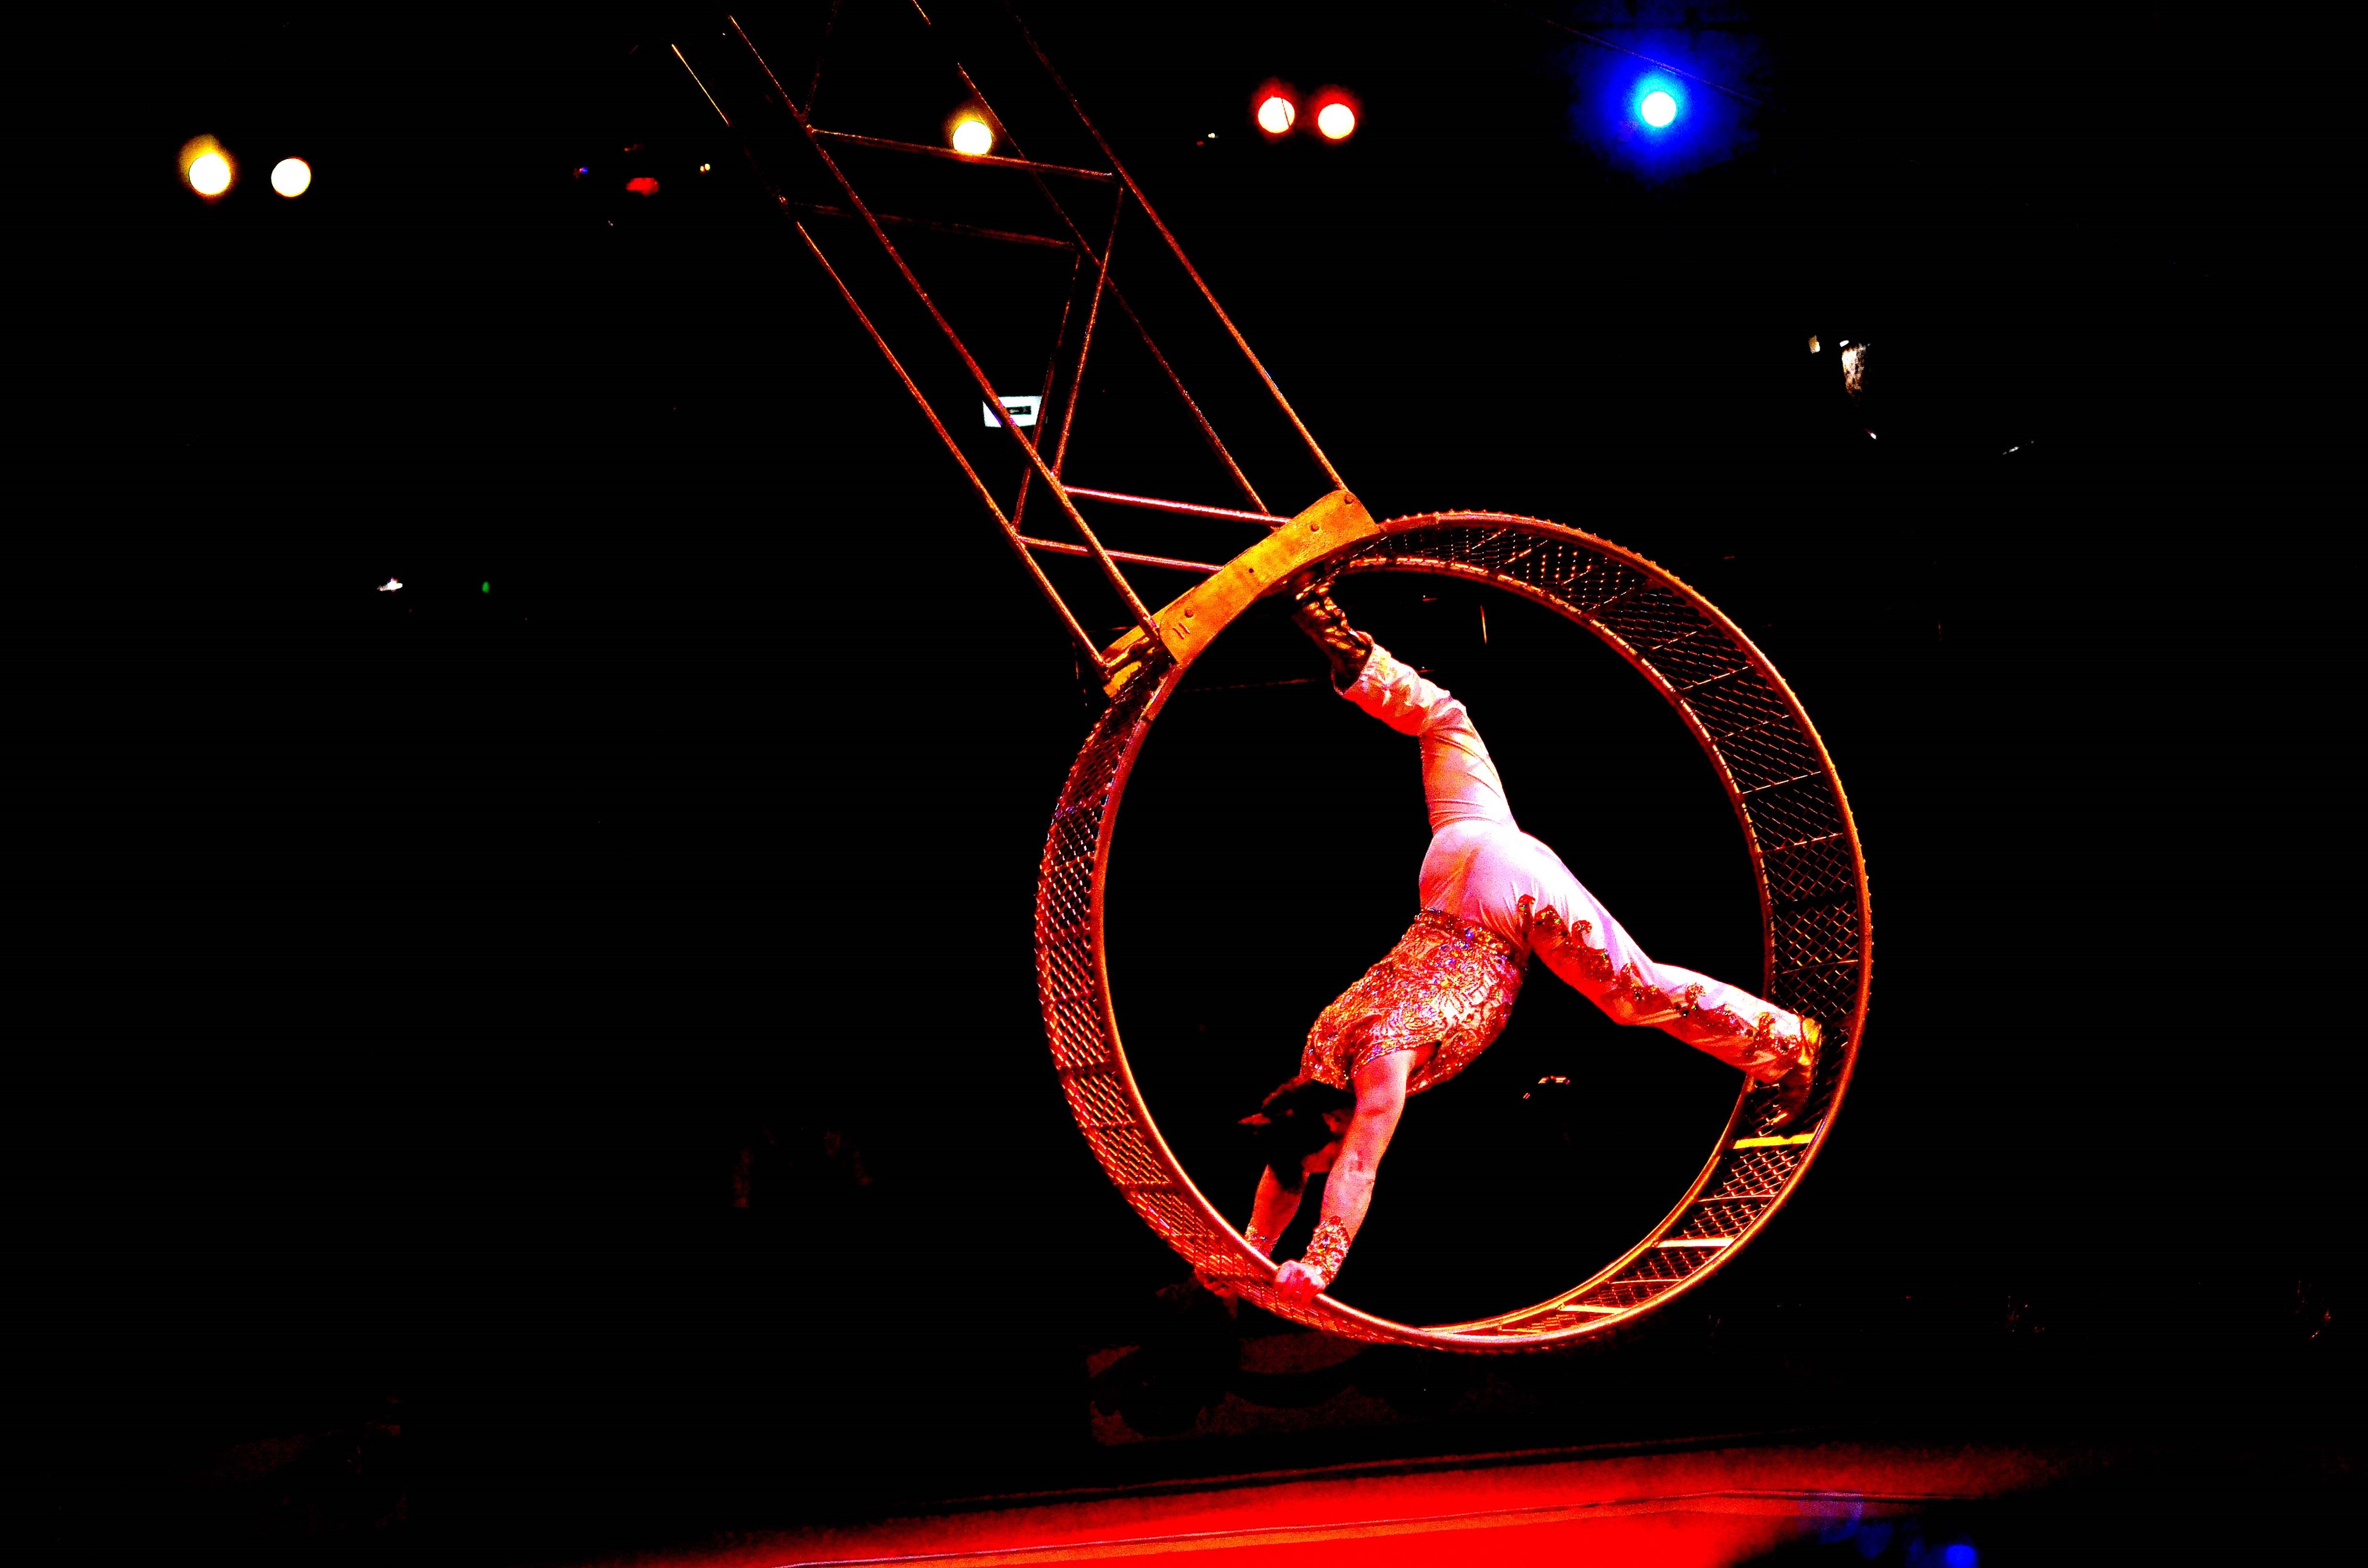 Acrobat in the circus wheel Cyr at the Blackpool Tower Circus